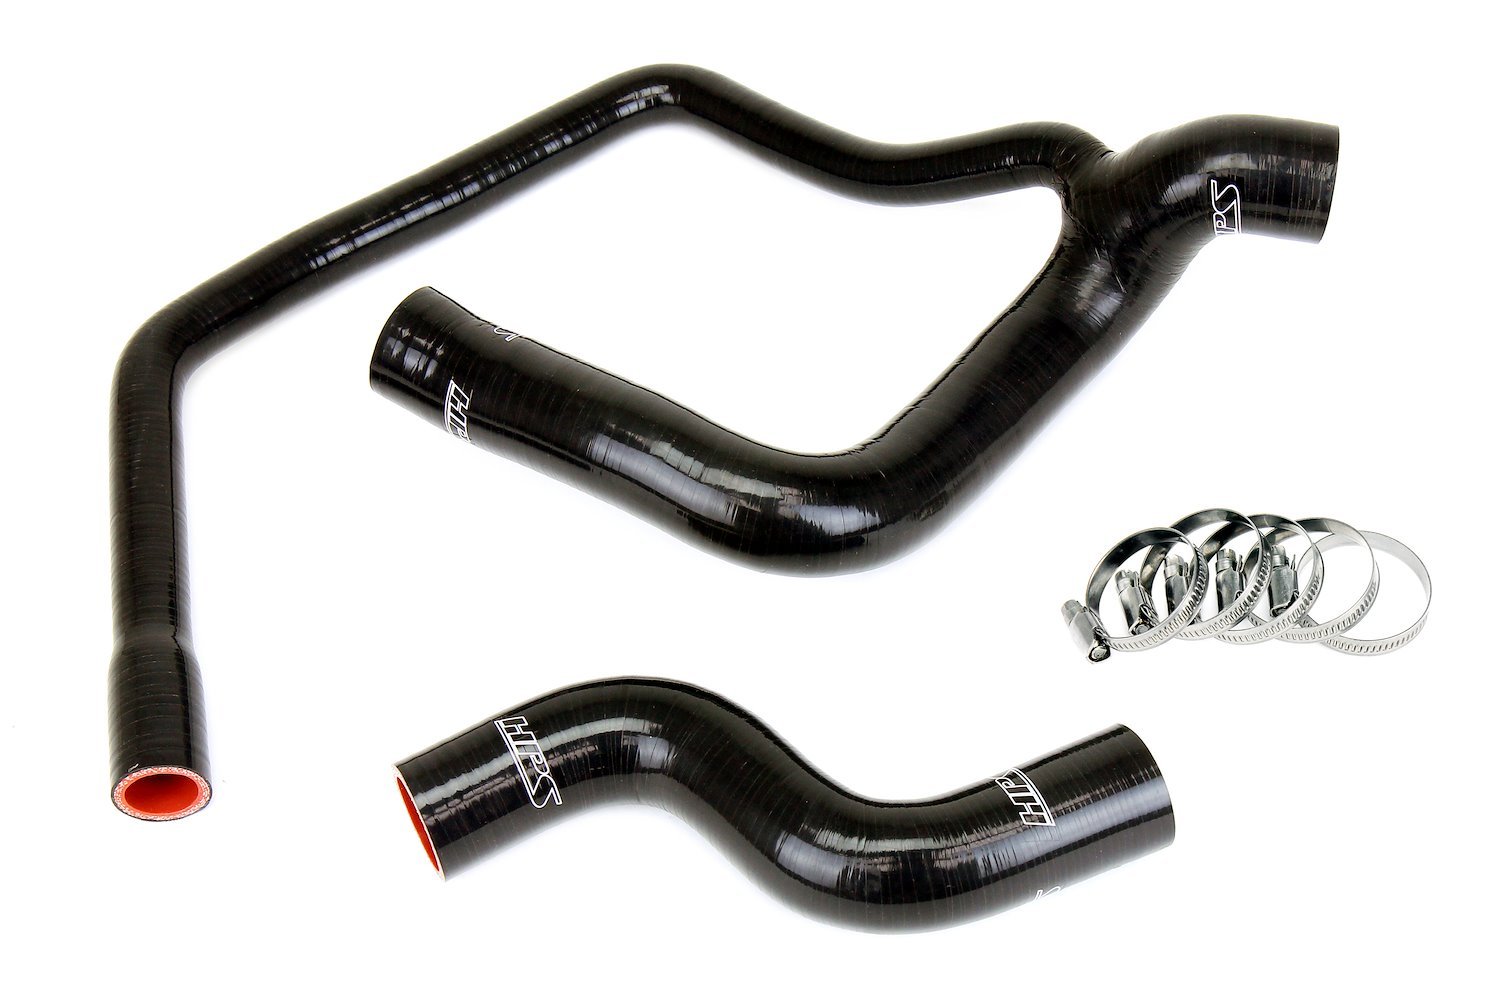 57-2032-BLK Radiator Hose Kit, High-Temp 3-Ply Reinforced Silicone, Replaces OEM Rubber Radiator Coolant Hoses